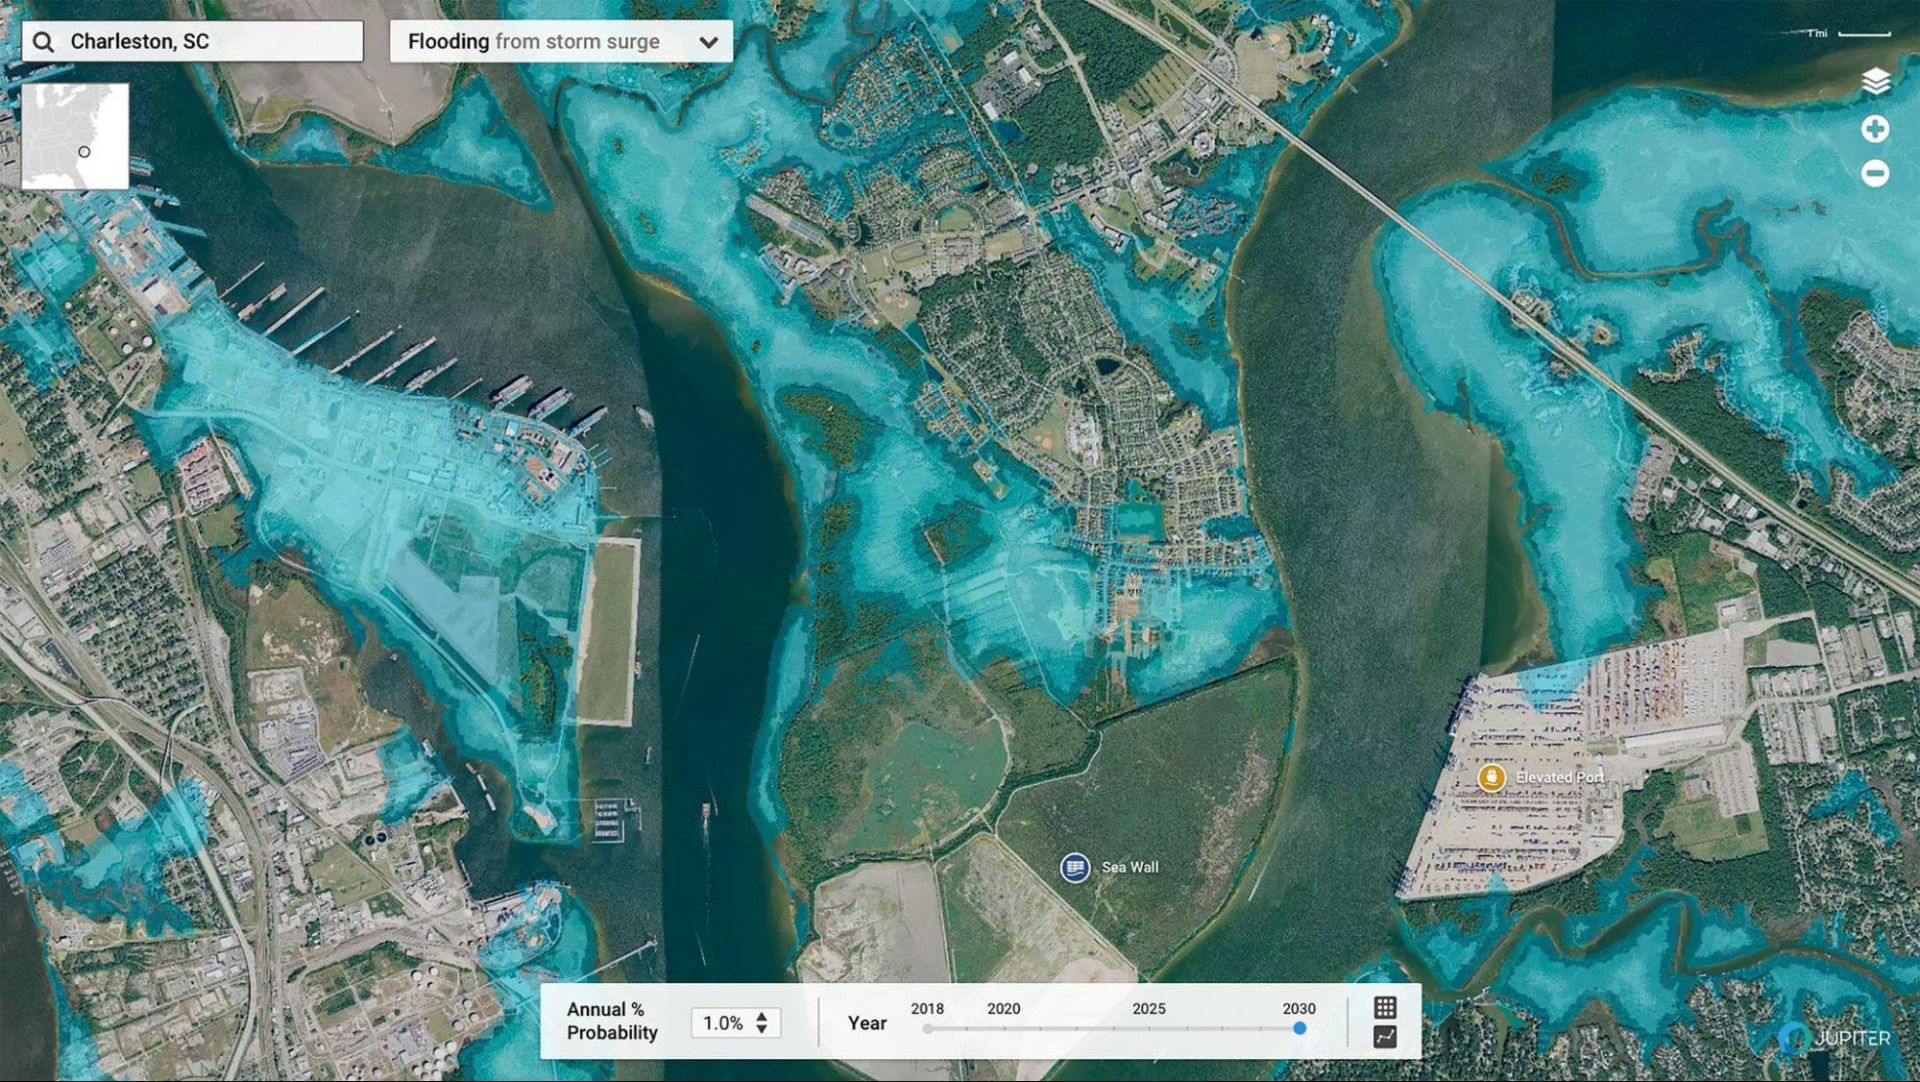 SOURCE: Jupiter Intel - map of Charleston that forecasts flooding from storm surges that have a 1 percent probability of occurring annually by 2030 under a high-end emissions scenario